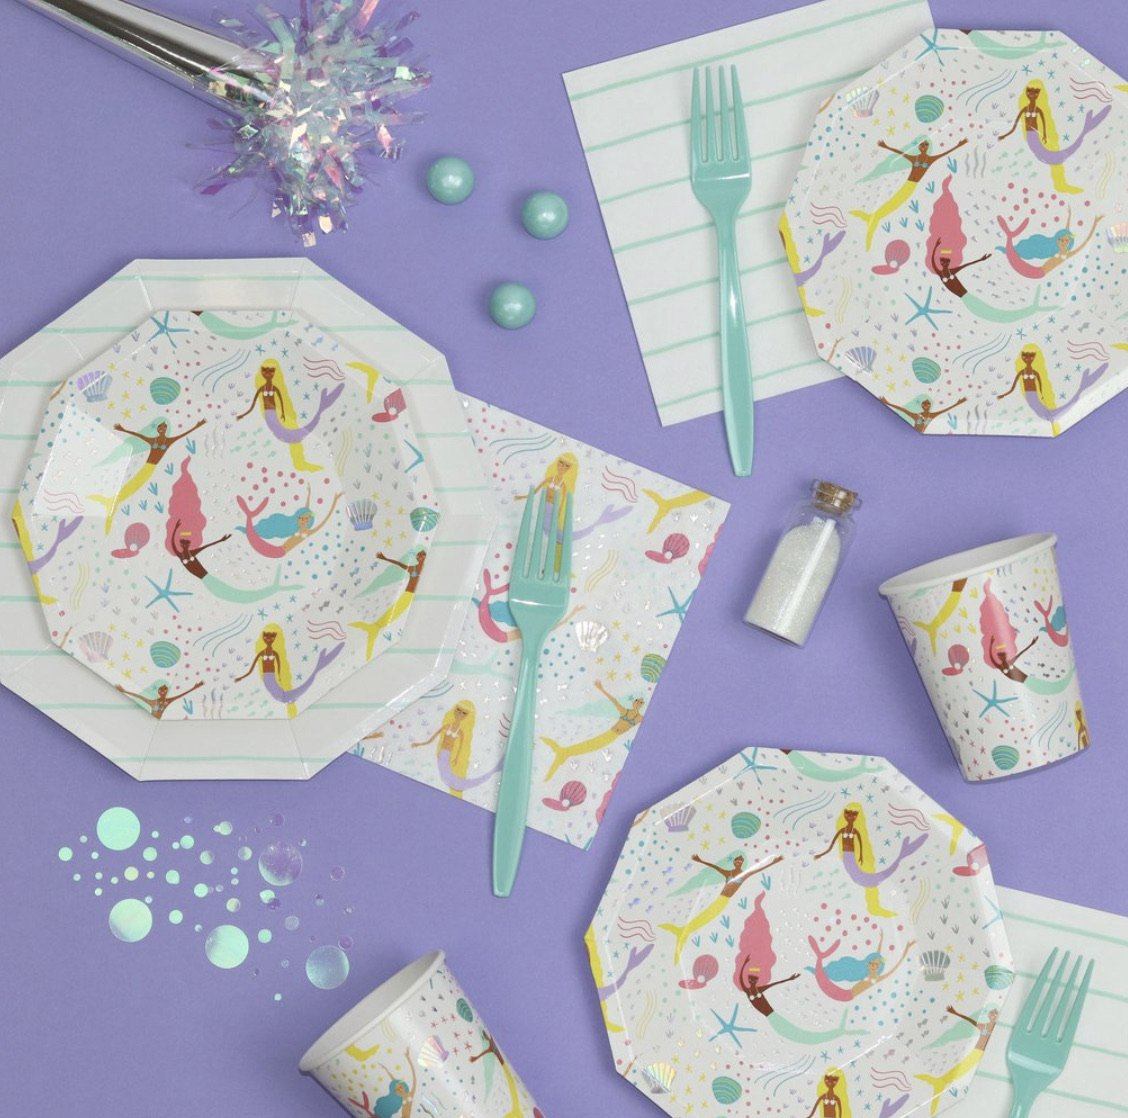 NAPKINS - LARGE UNDER THE SEA DAYDREAM SOCIETY, NAPKINS, Daydream Society - Bon + Co. Party Studio